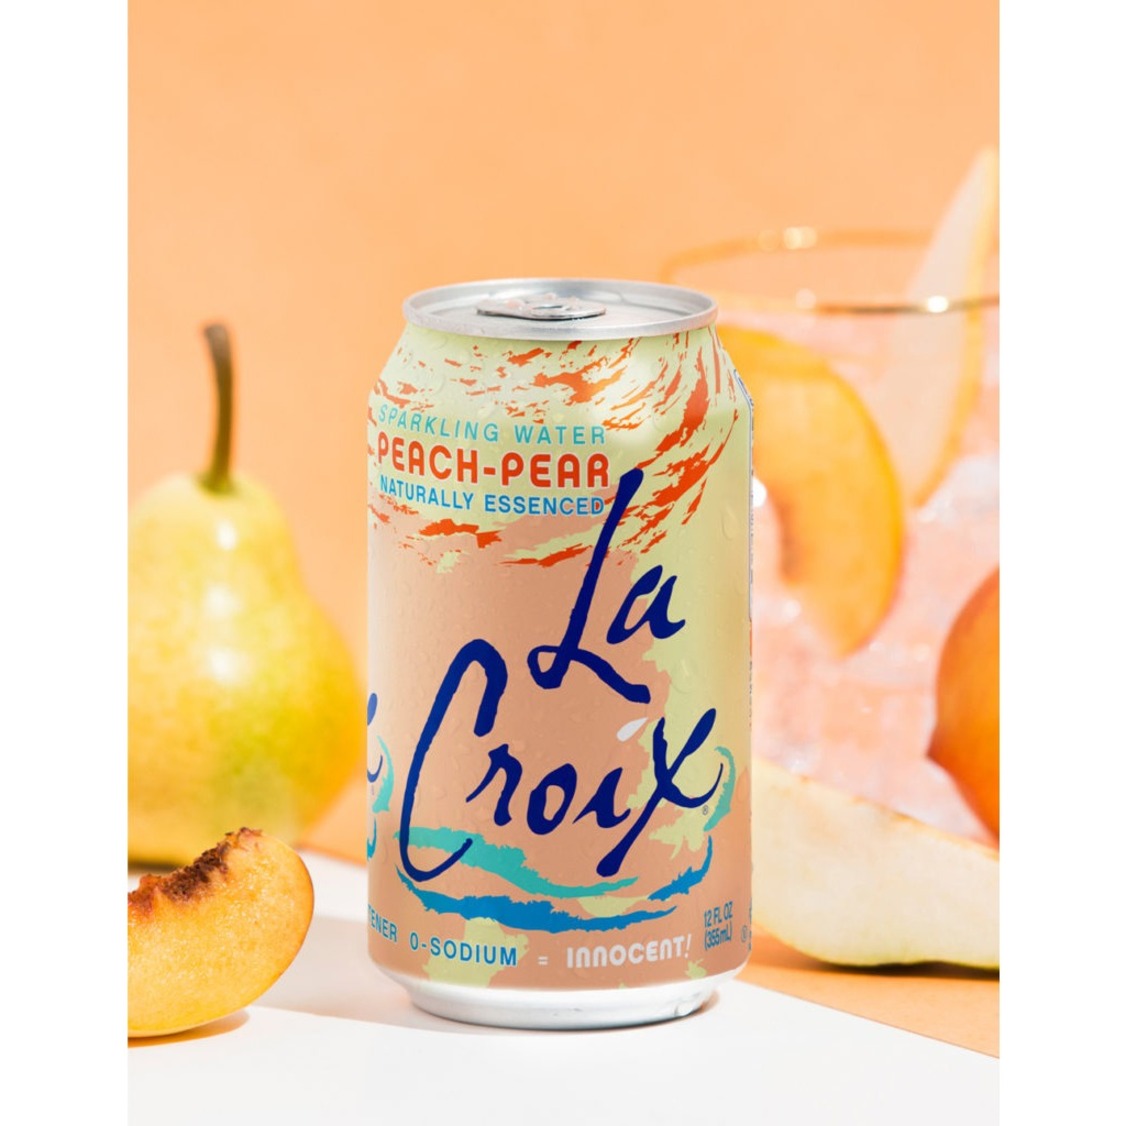 LaCroix Sparkling Water, Peach-Pear- 2/12 packs 12 oz - image 3 of 5